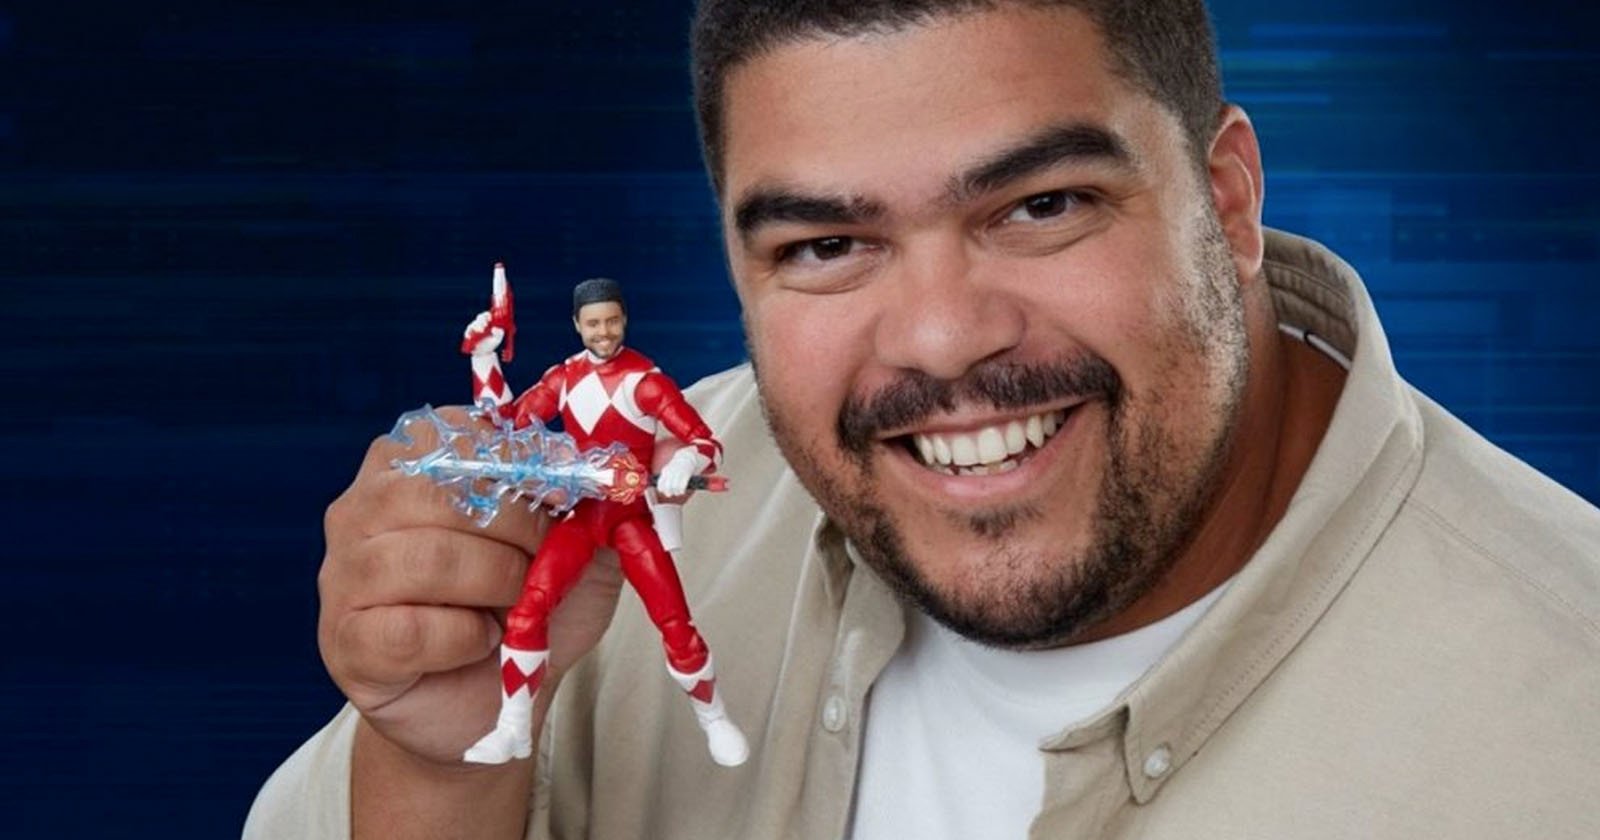 Hasbro Will Let You Turn Your Selfie into an Action Figure